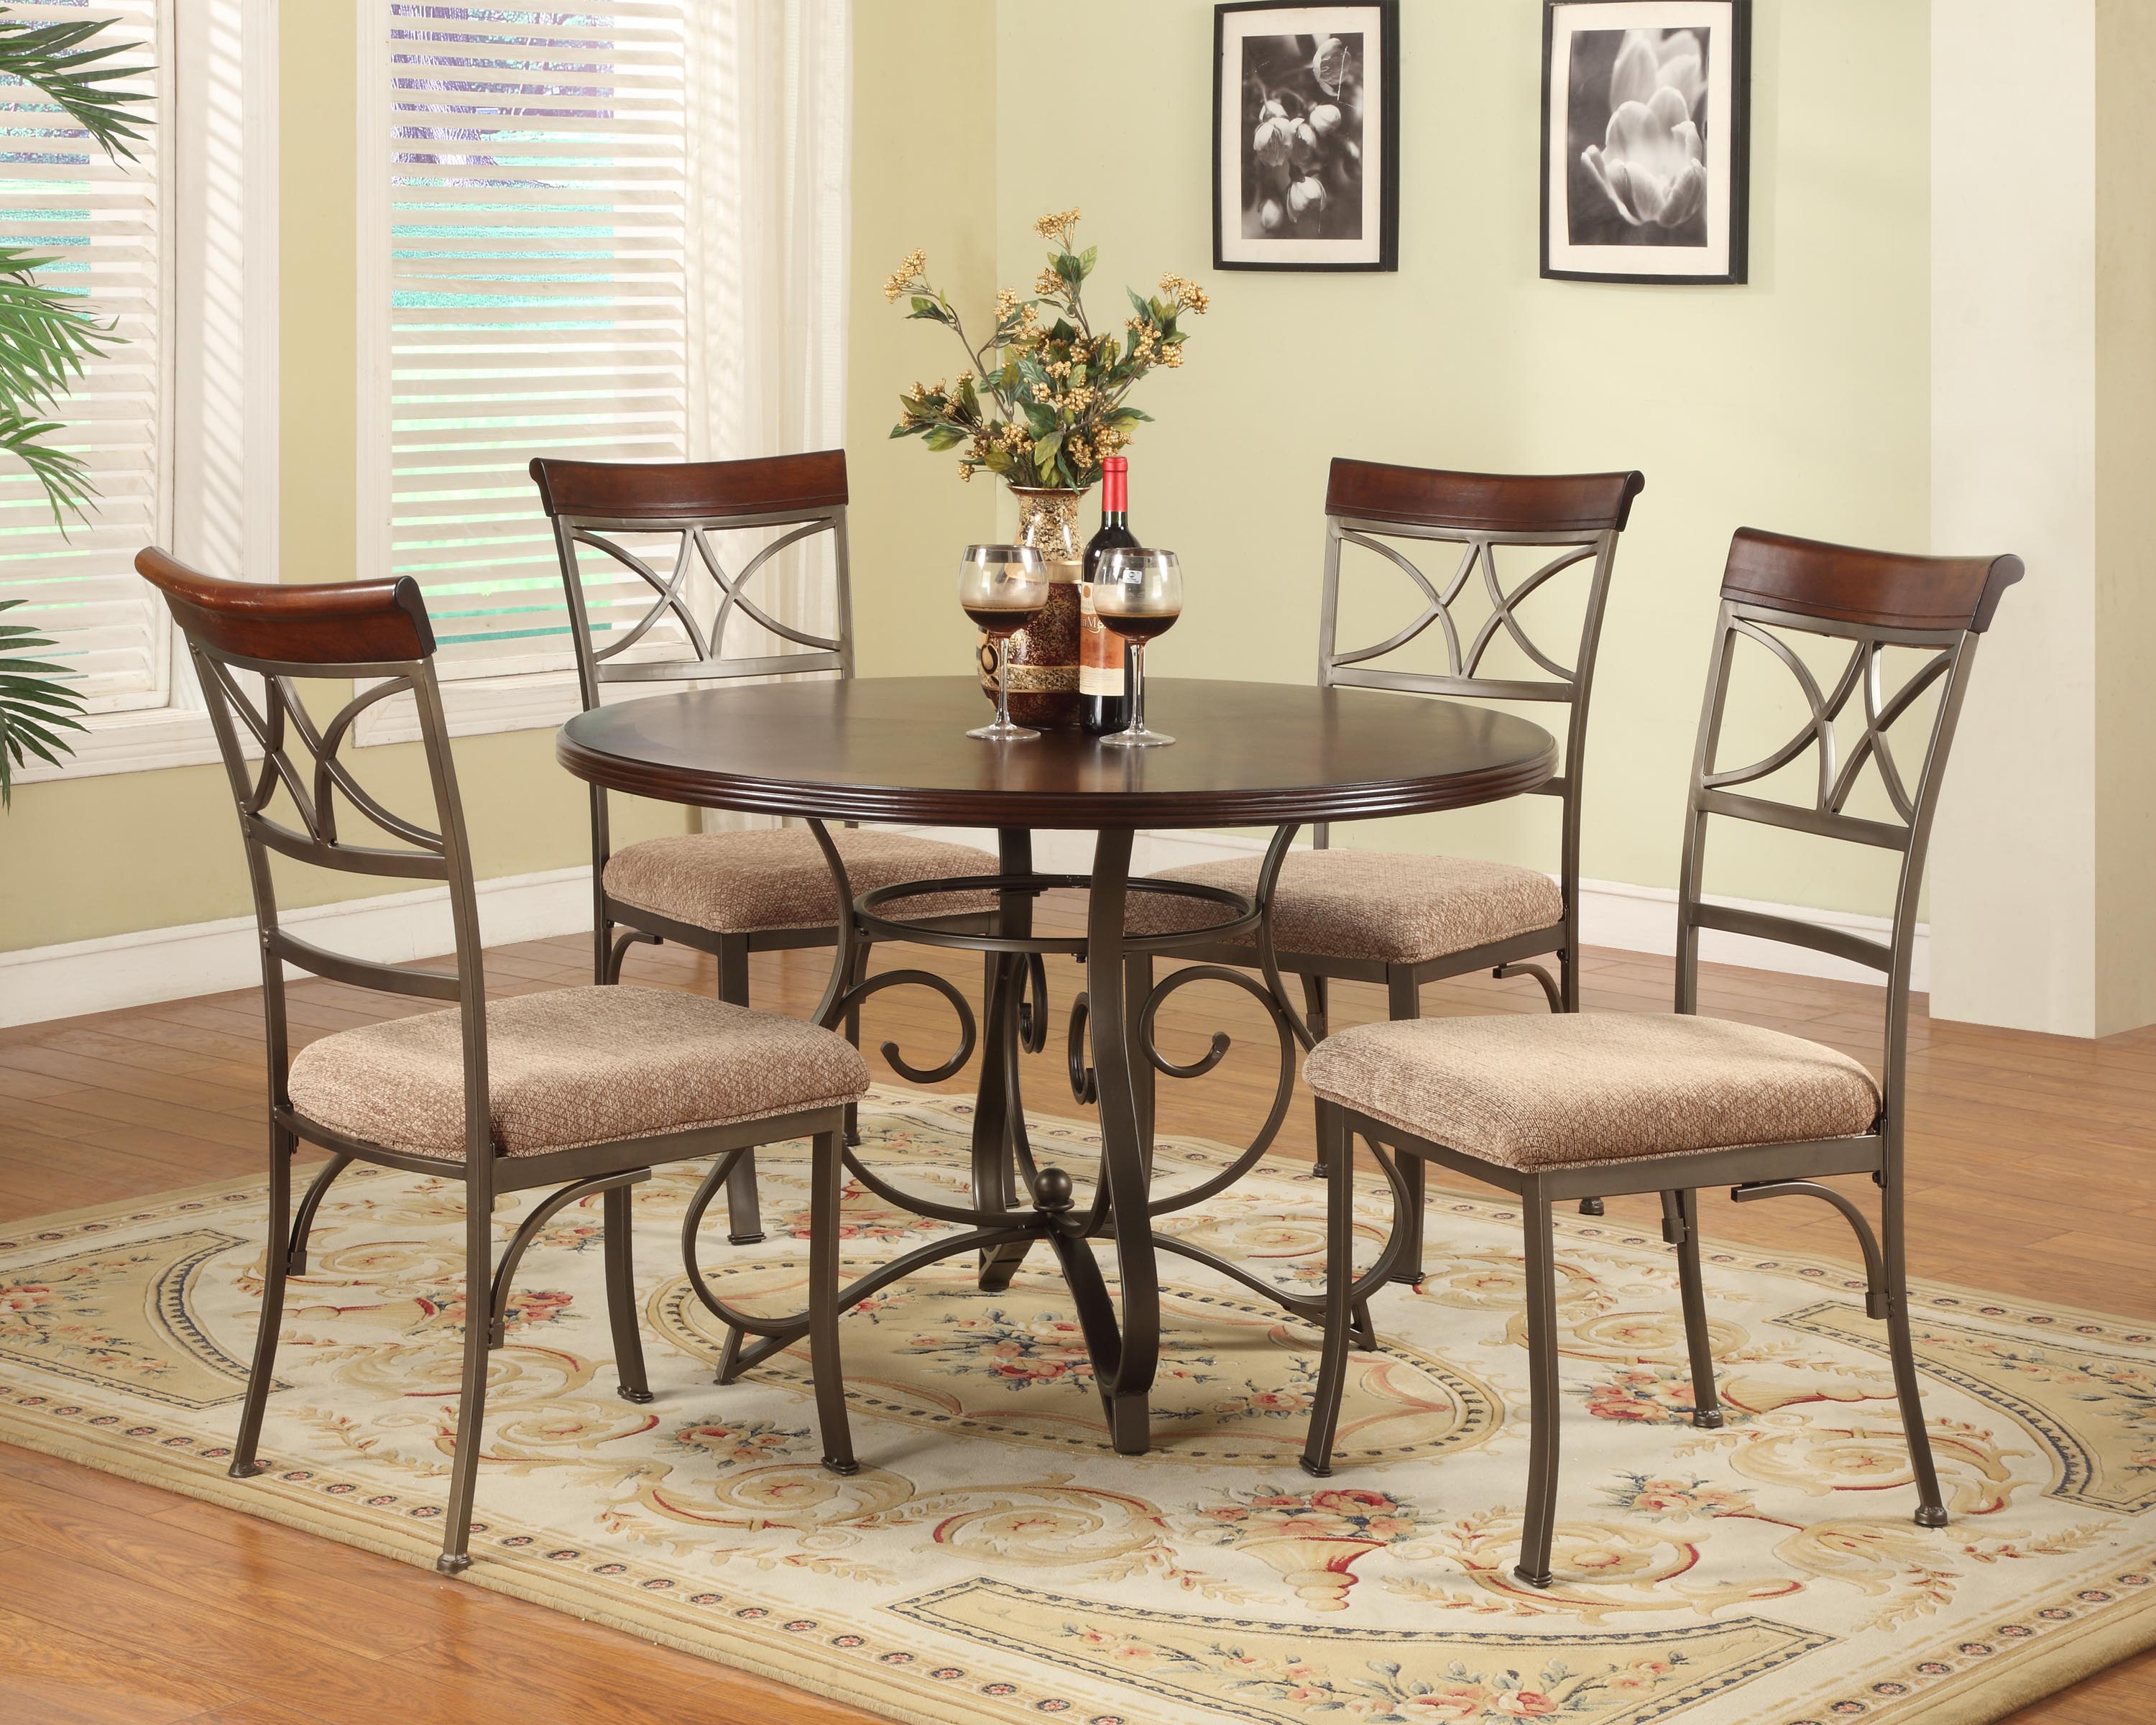 L Powell 5-Pc. Hamilton Dining Set - (1) 697-413 Dining Table & (4) 697-434 Side Chairs